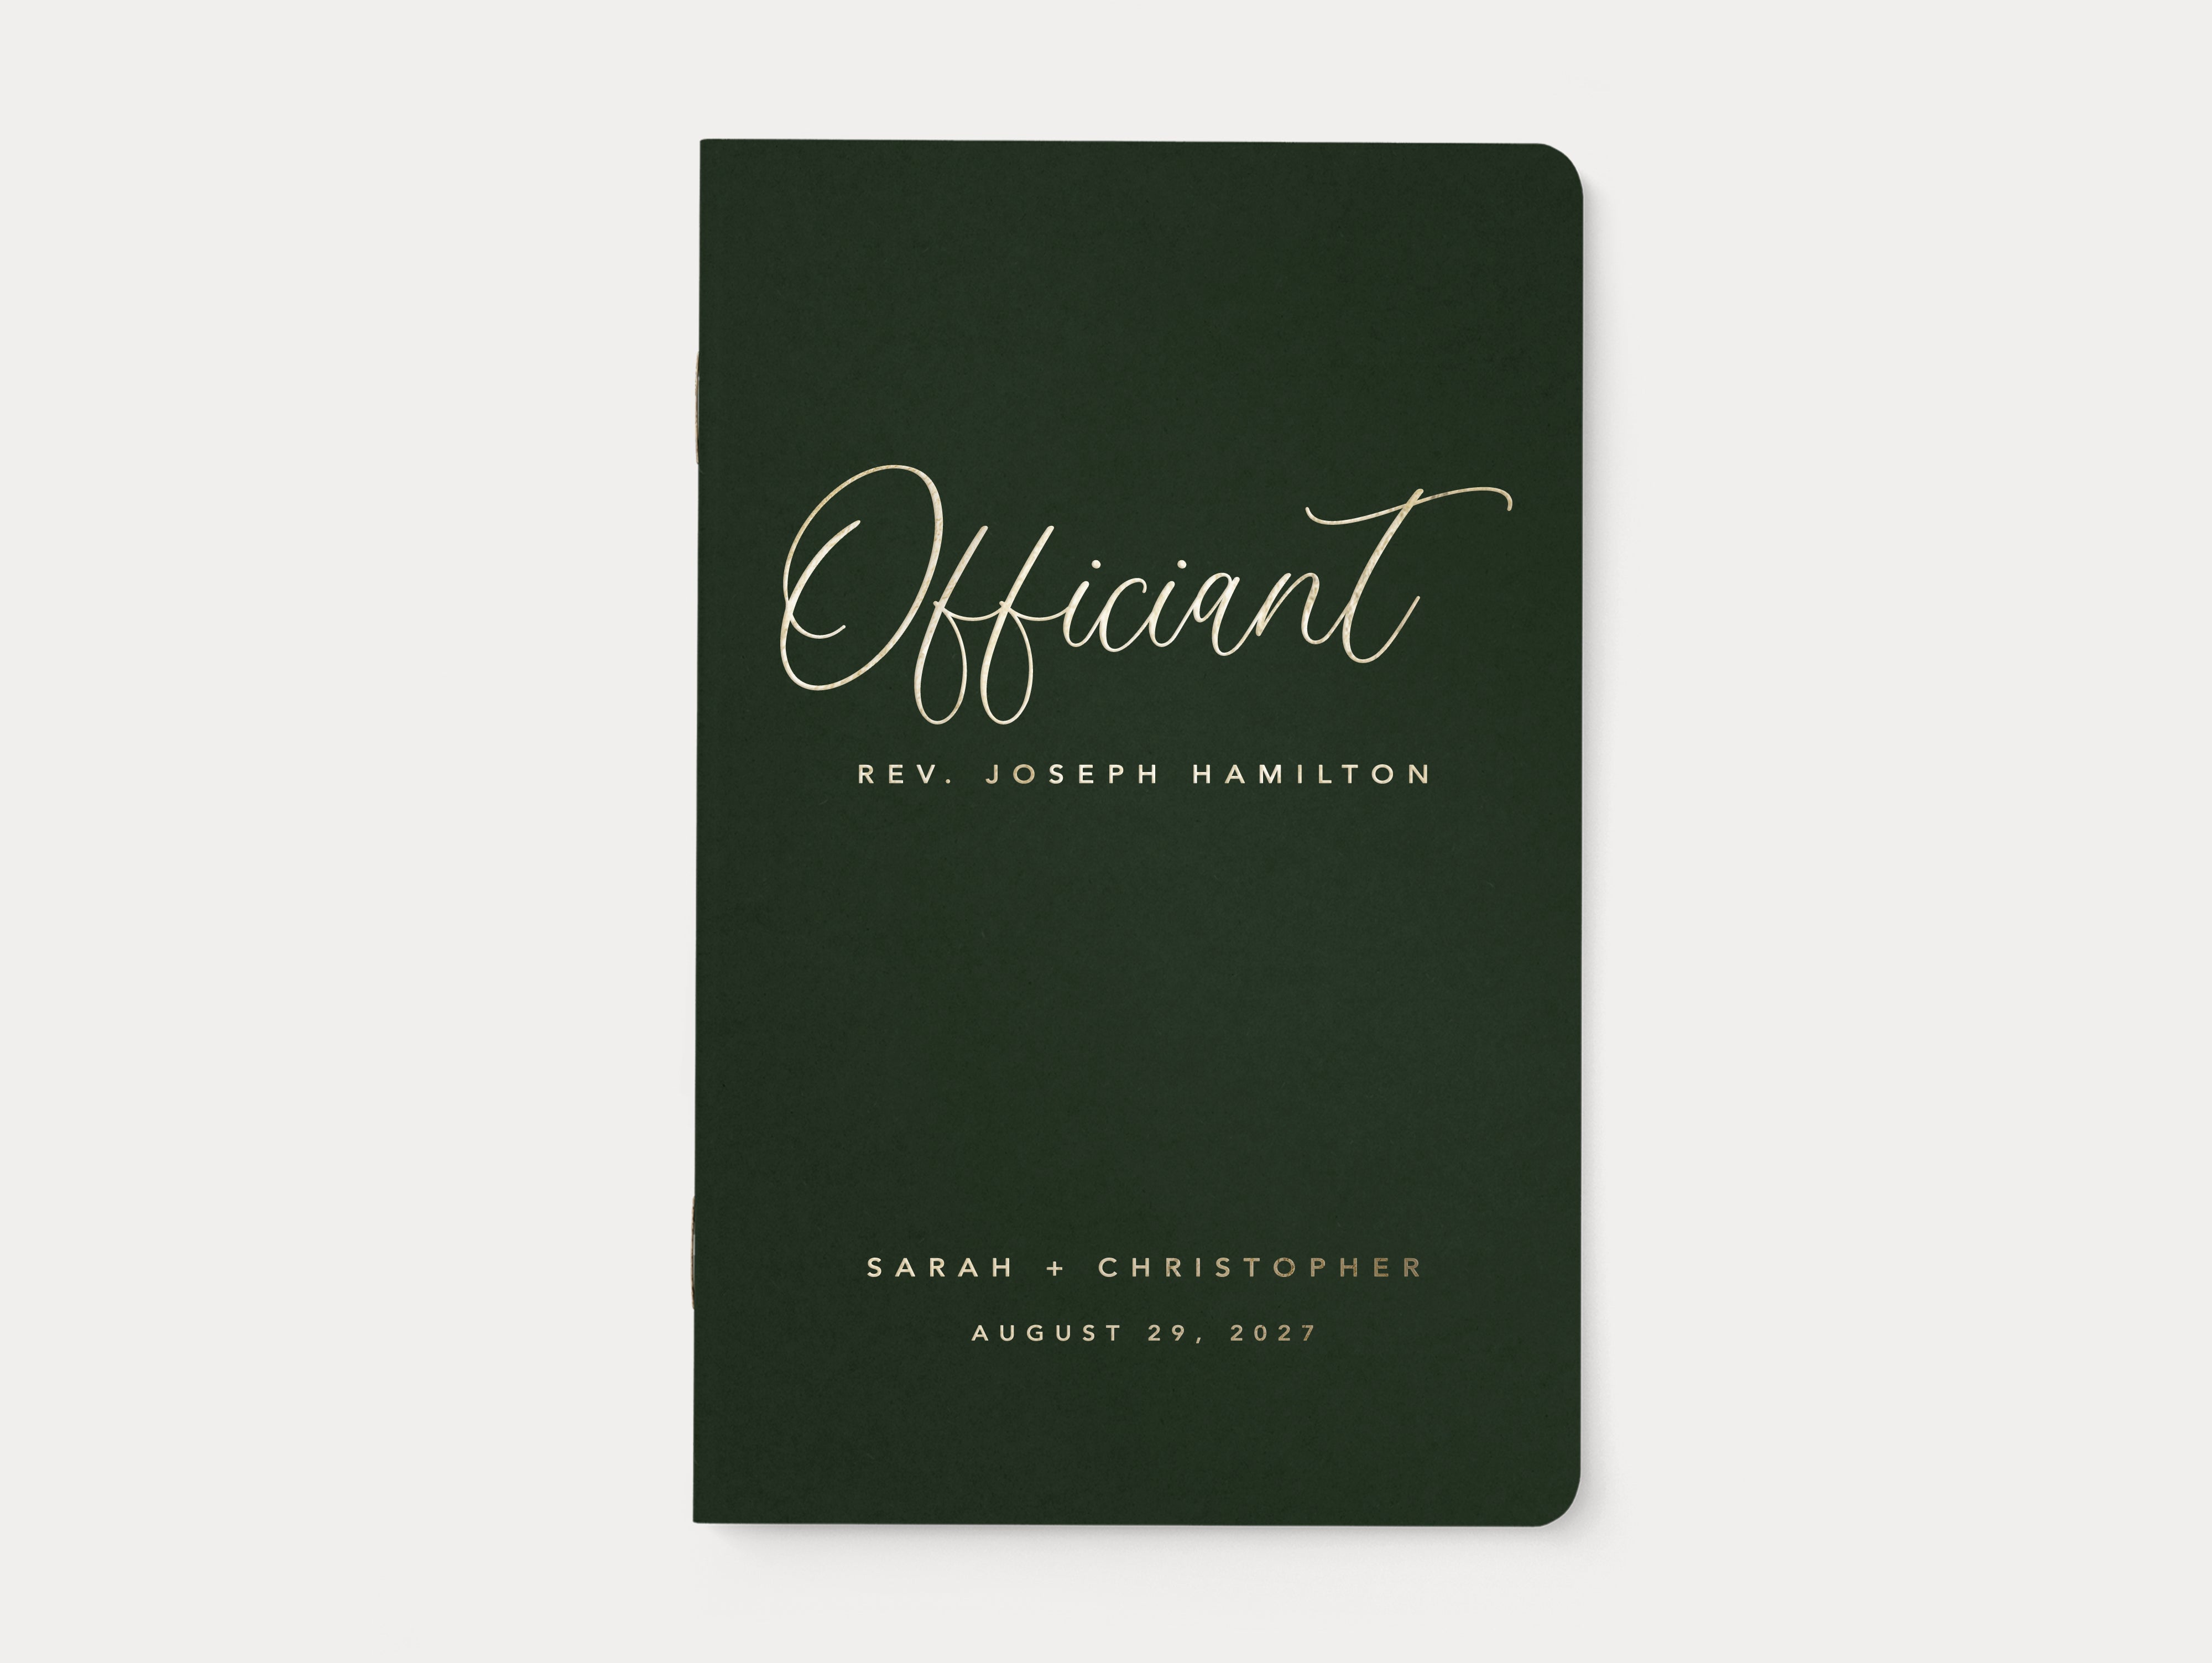 Luxury gold foil wedding officiant book with green cover.